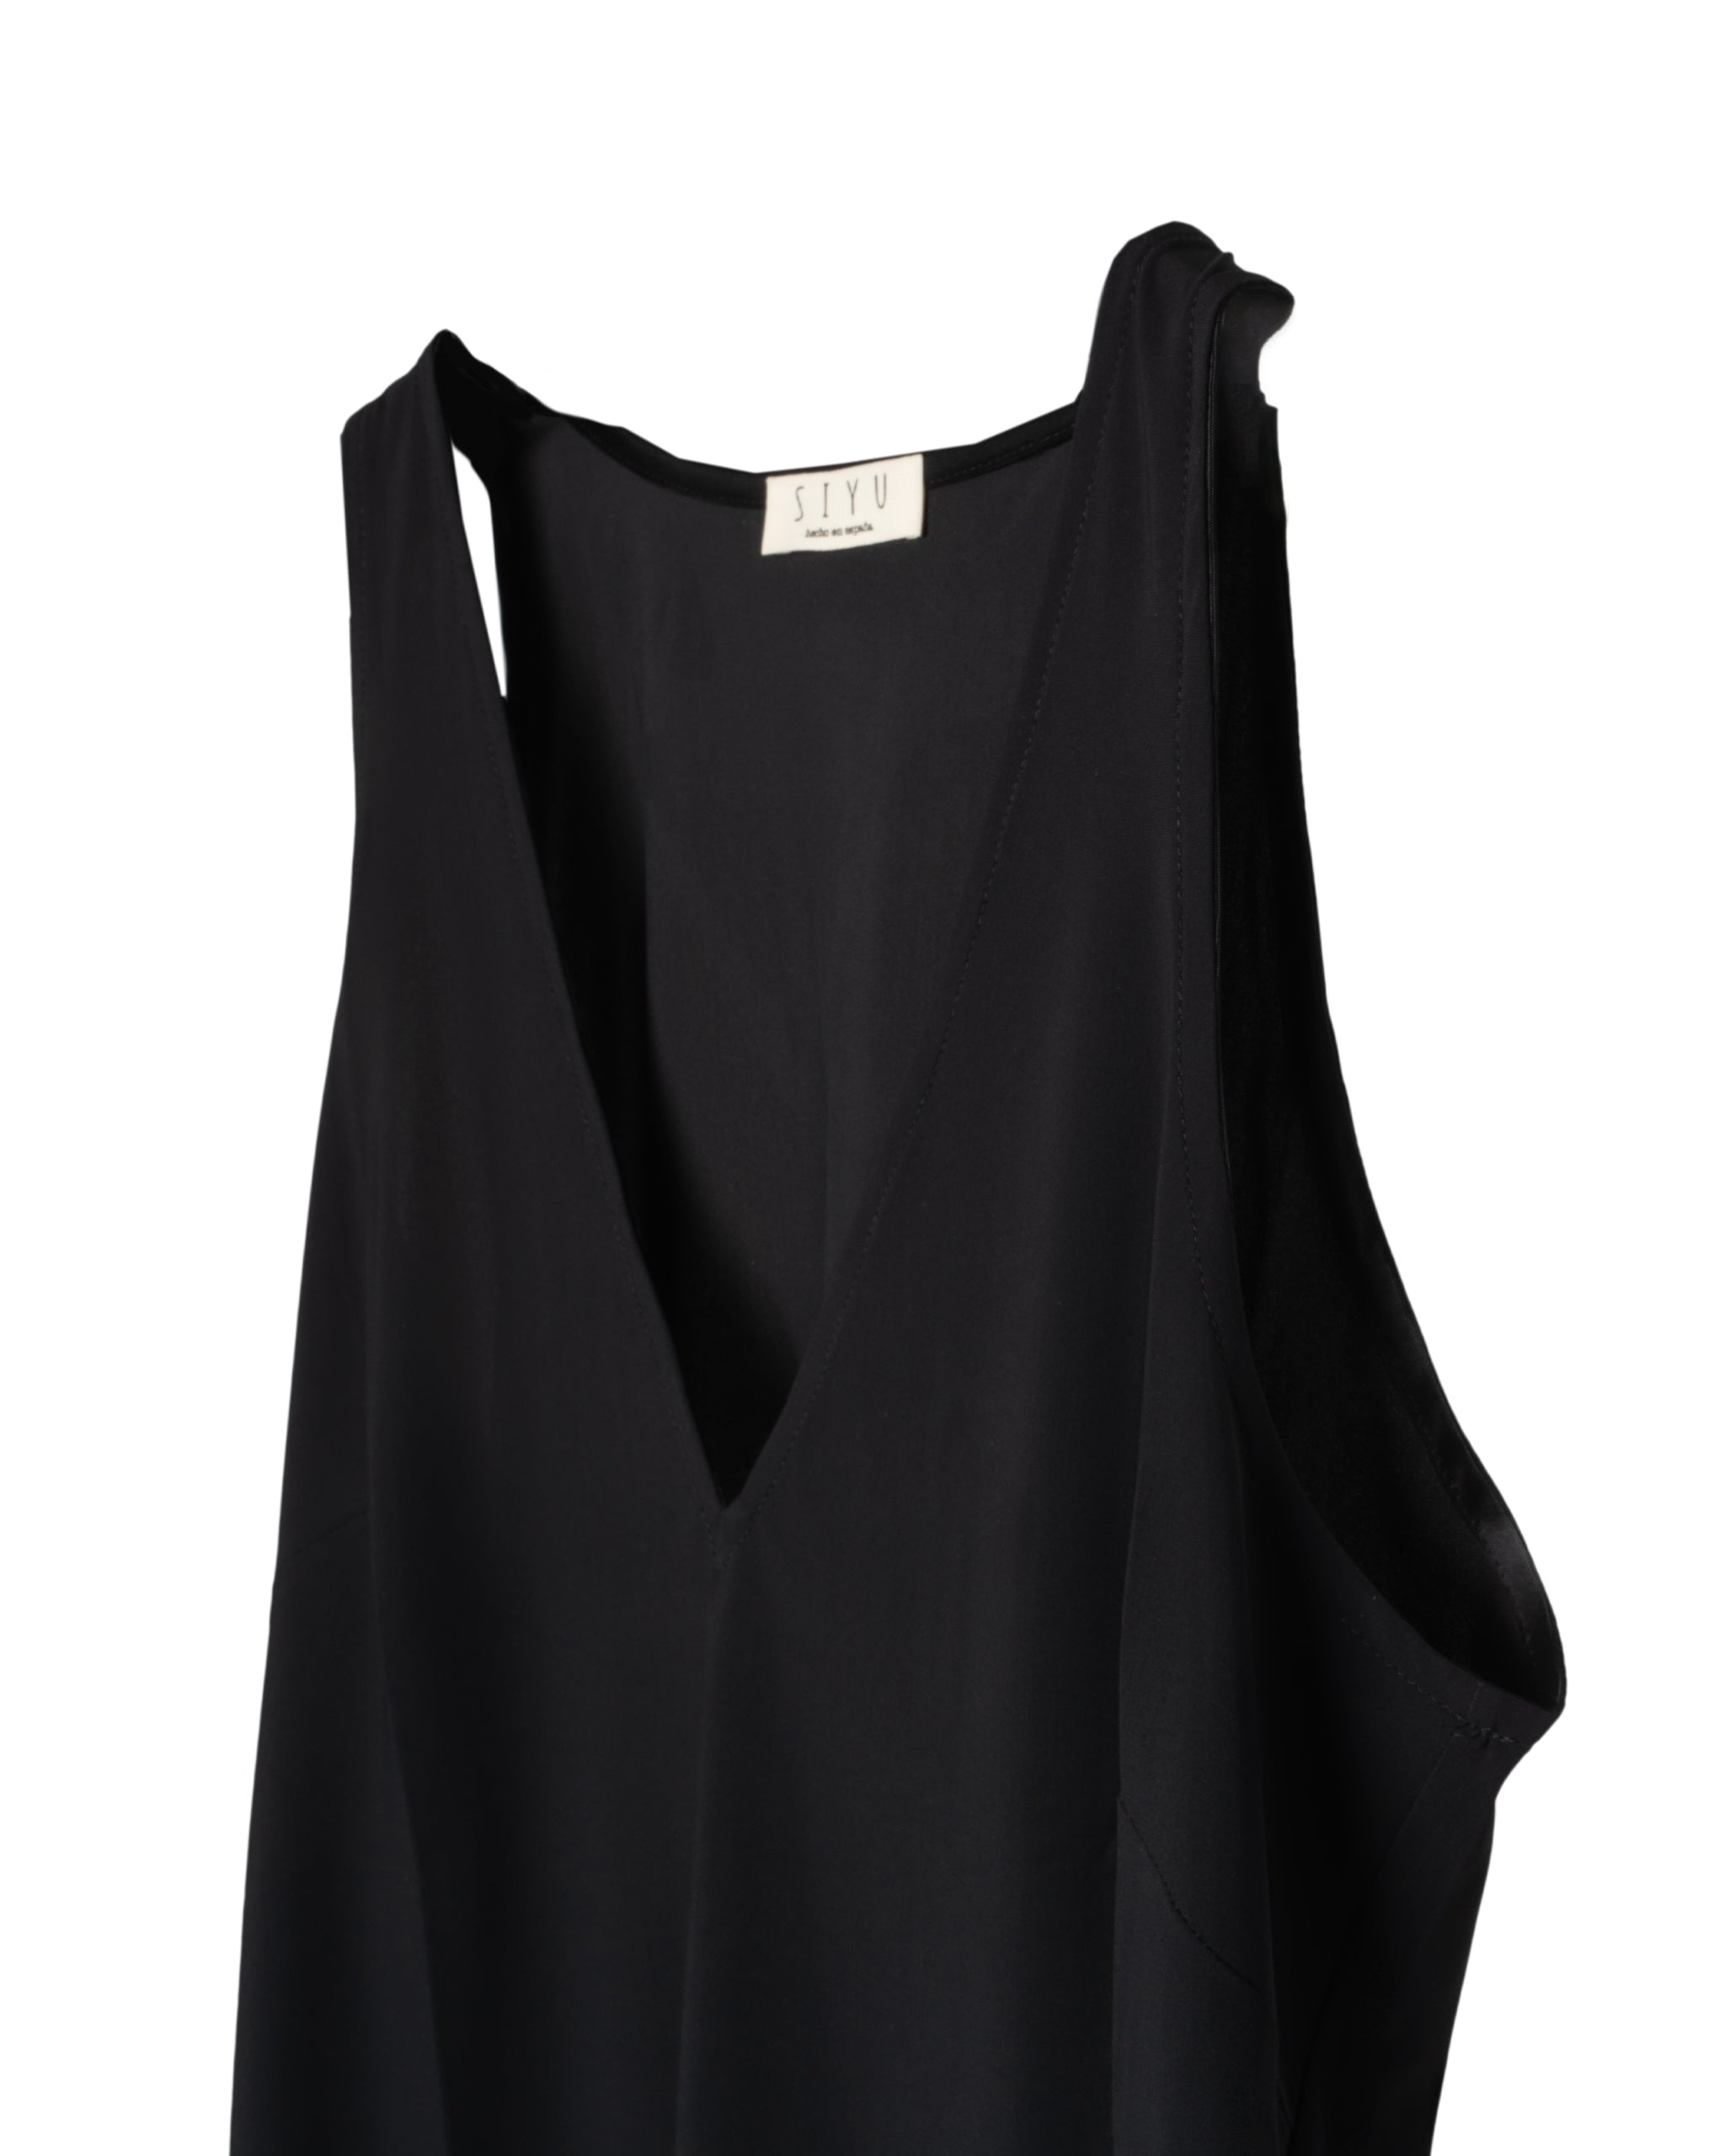 SLEEVELESS SOLID COLOR V-TOP